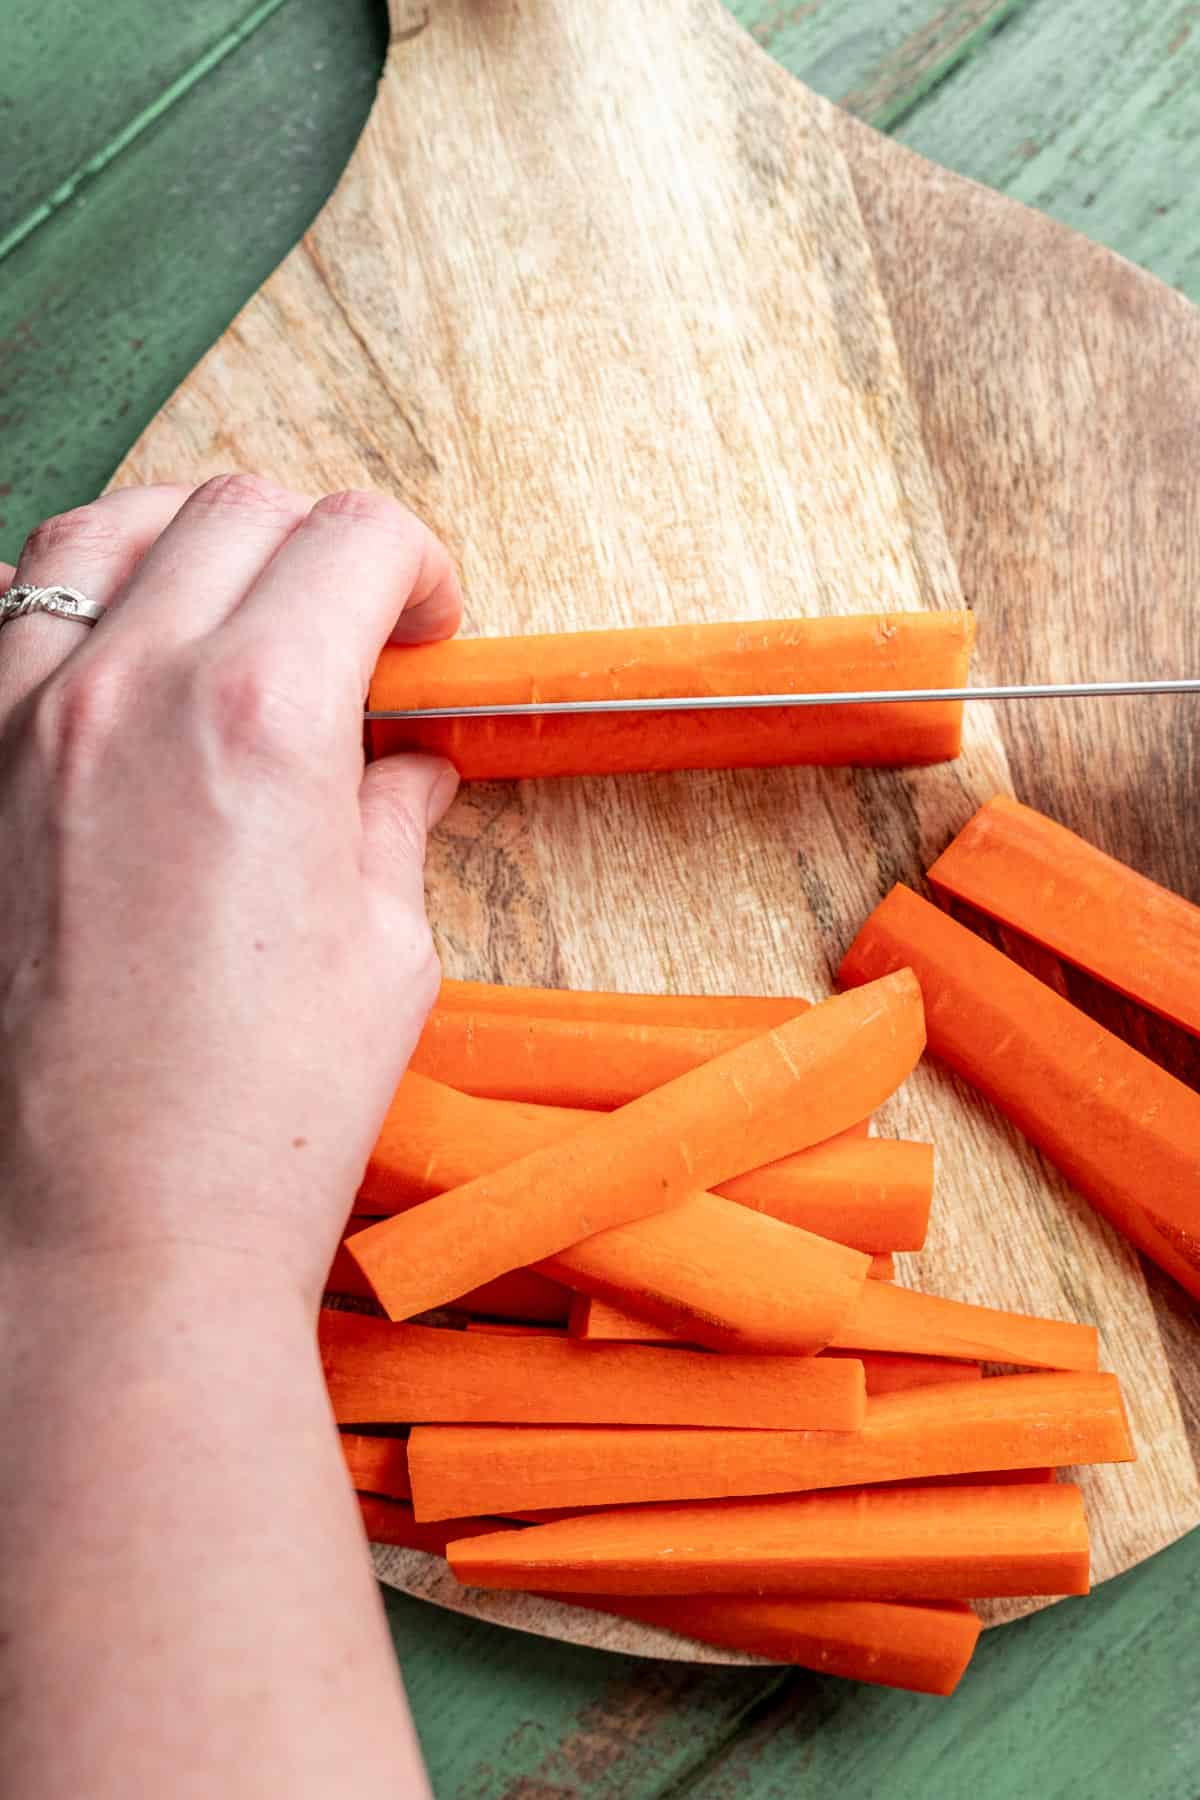 An overhead view of a carrot being cut into fries.